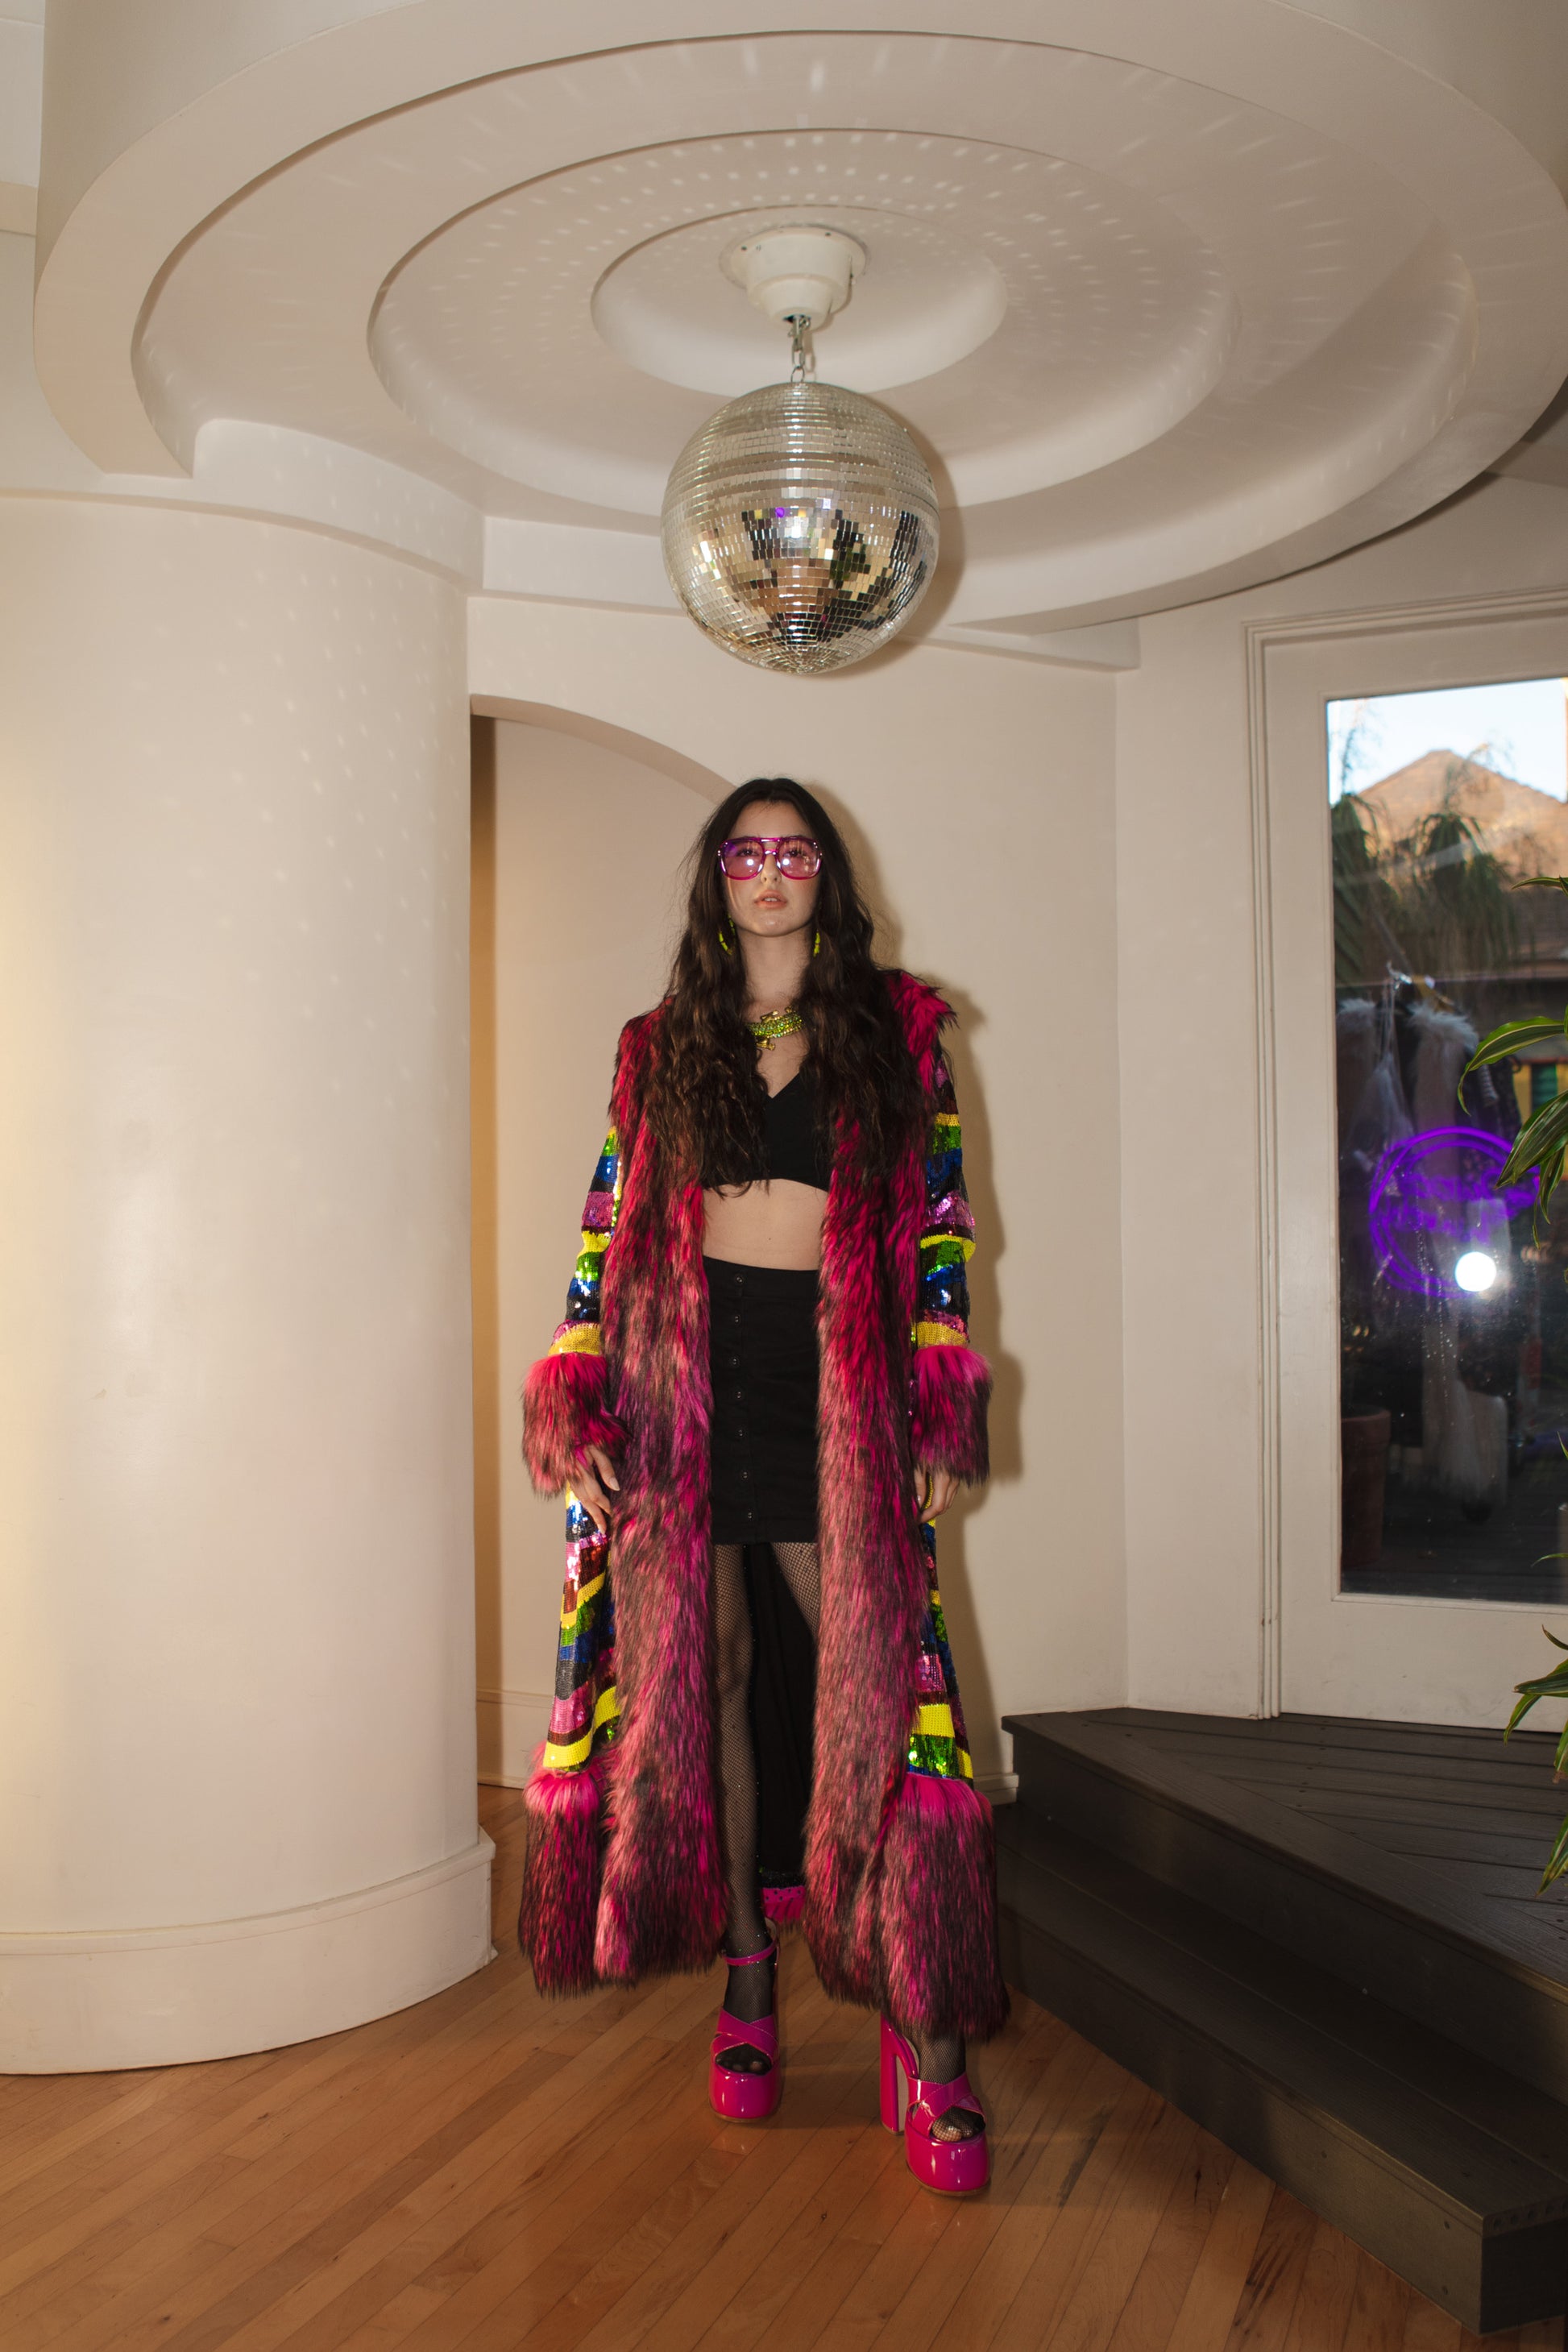 jennafer grace Rainbow Road Sequin deluxe penny lane faux fur duster jacket coat almost famous klaus hargreeves rainbow striped sequins colorful stripes hot pink fuchsia and black faux fur elton john inspired boho bohemian hippie romantic whimsical retro opera coat 70s revival 1970s unisex handmade in California USA